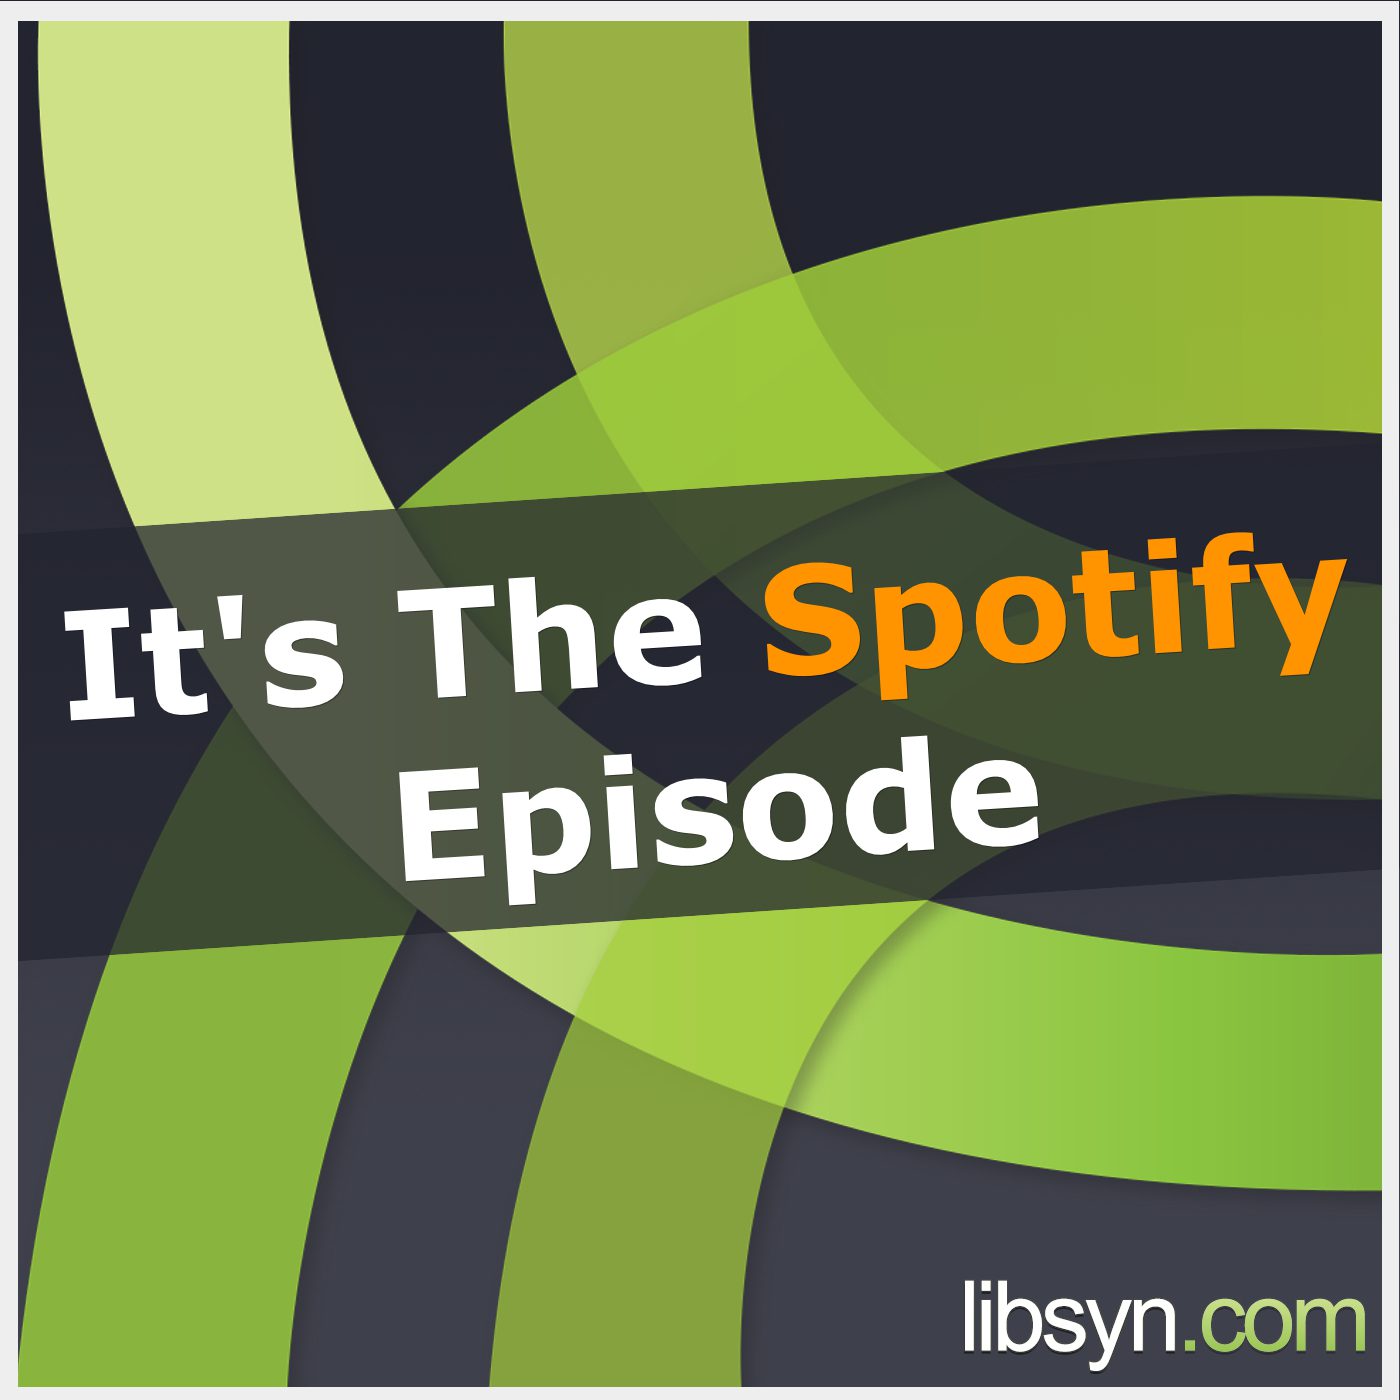 spotify partners with Libsyn to support podcasting and podcasters